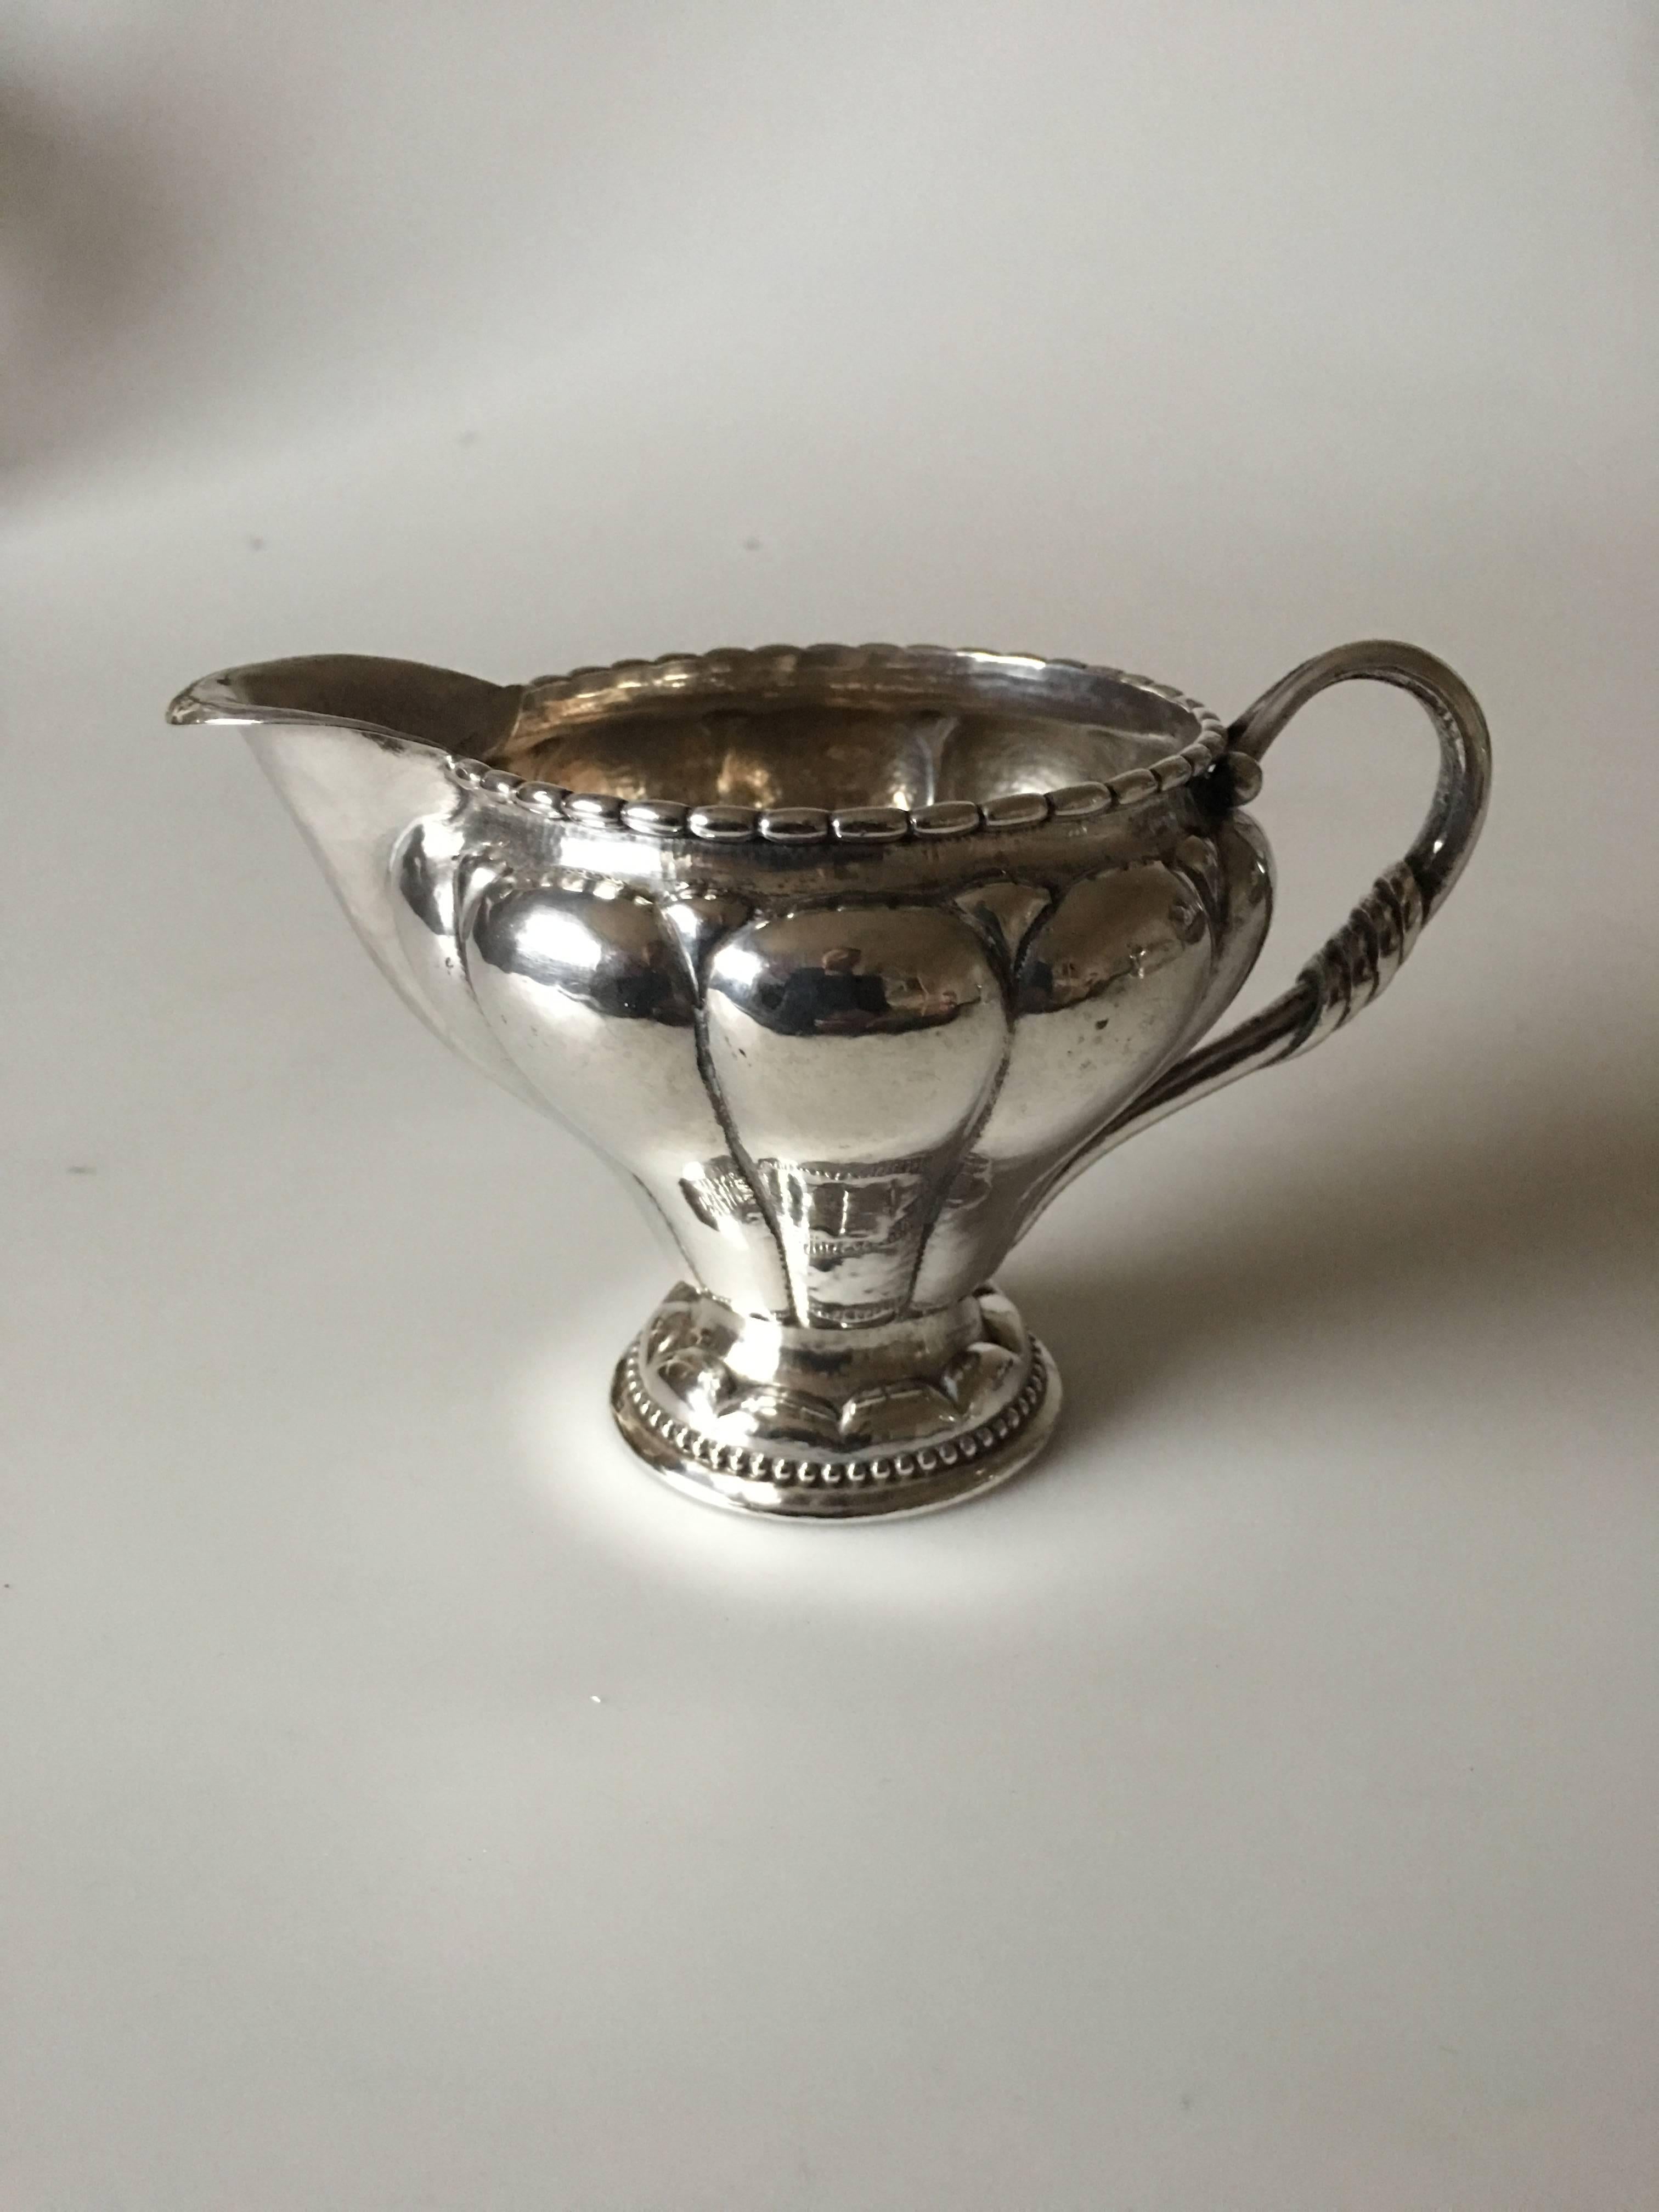 20th Century Georg Jensen Tea Set #26 in Silver with Early Marks from 1904-1908 For Sale